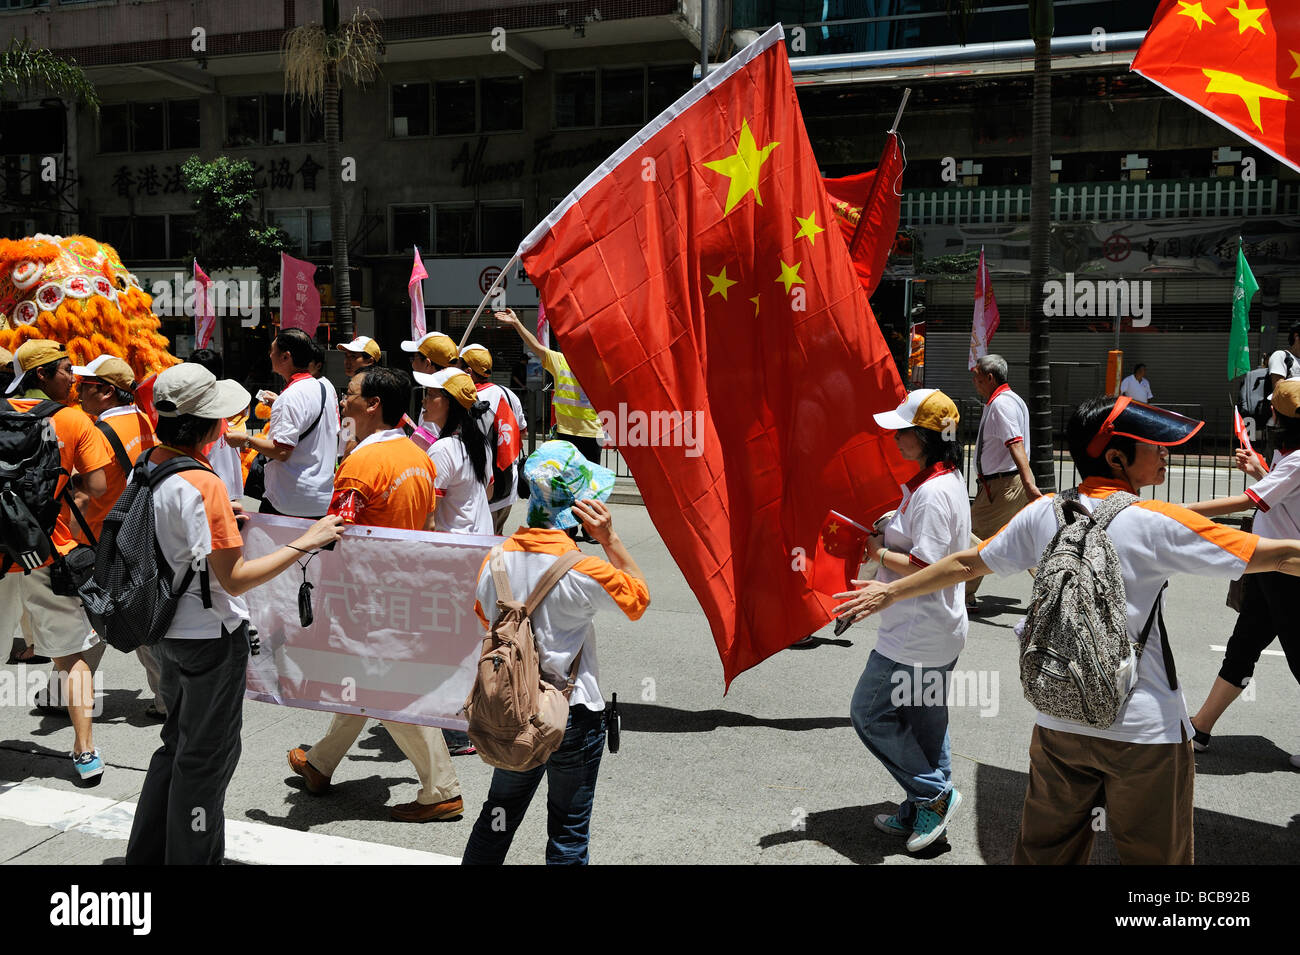 1 July is Hong Kong Special Administrative Region Establishment Day with parades for and demonstrations against the government. Stock Photo